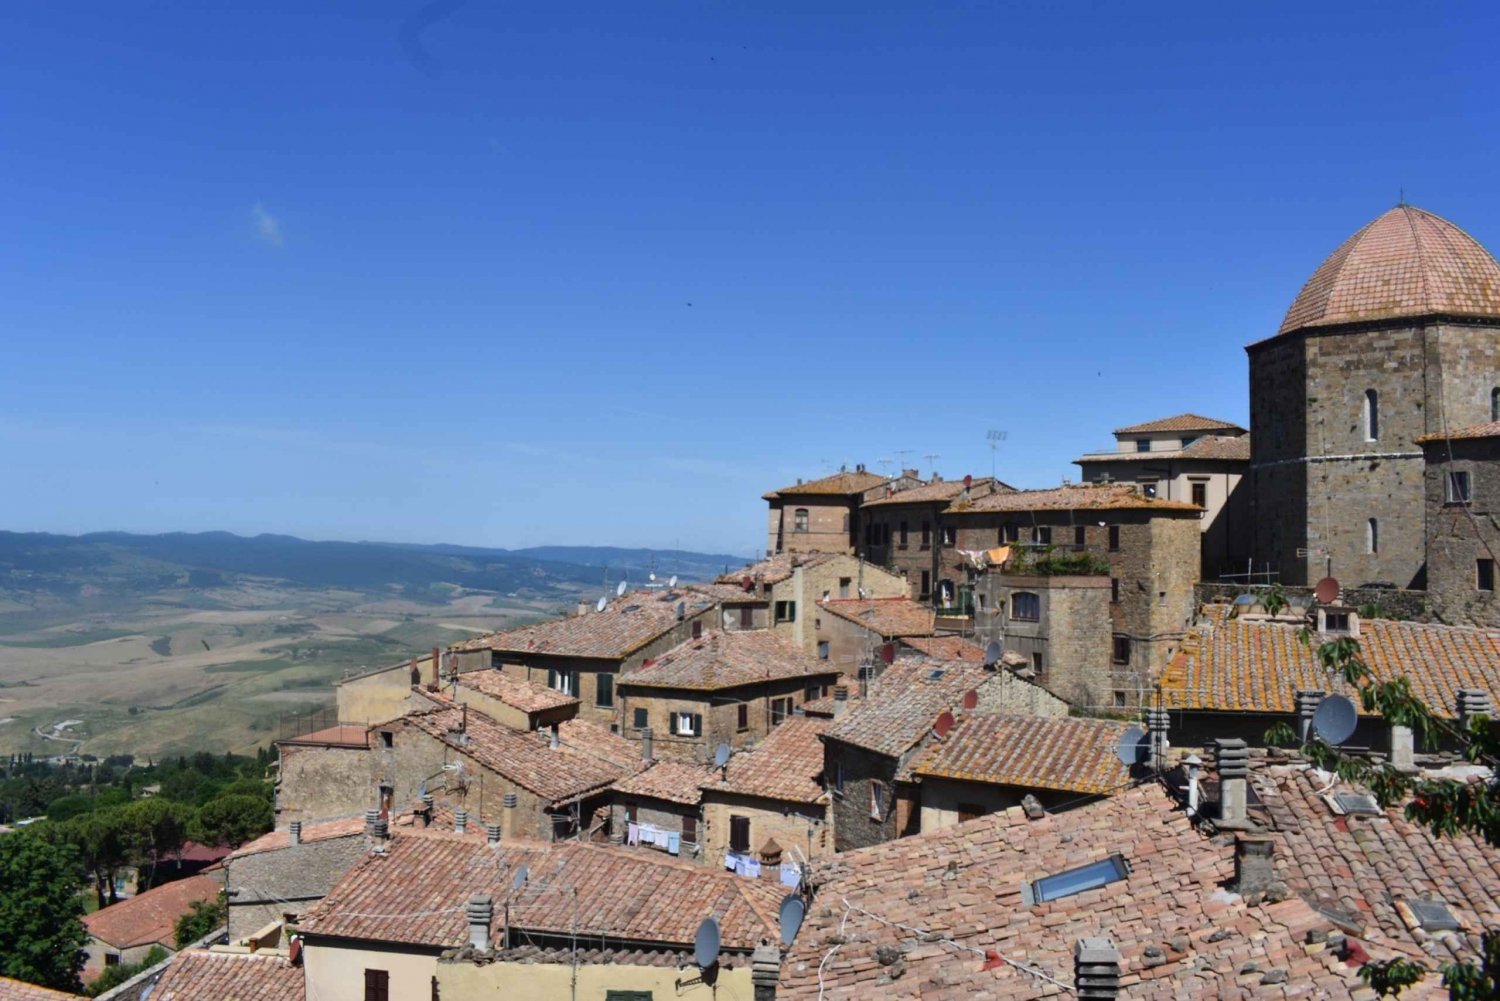 San Gimignano & Volterra: Private Transfer from Florence